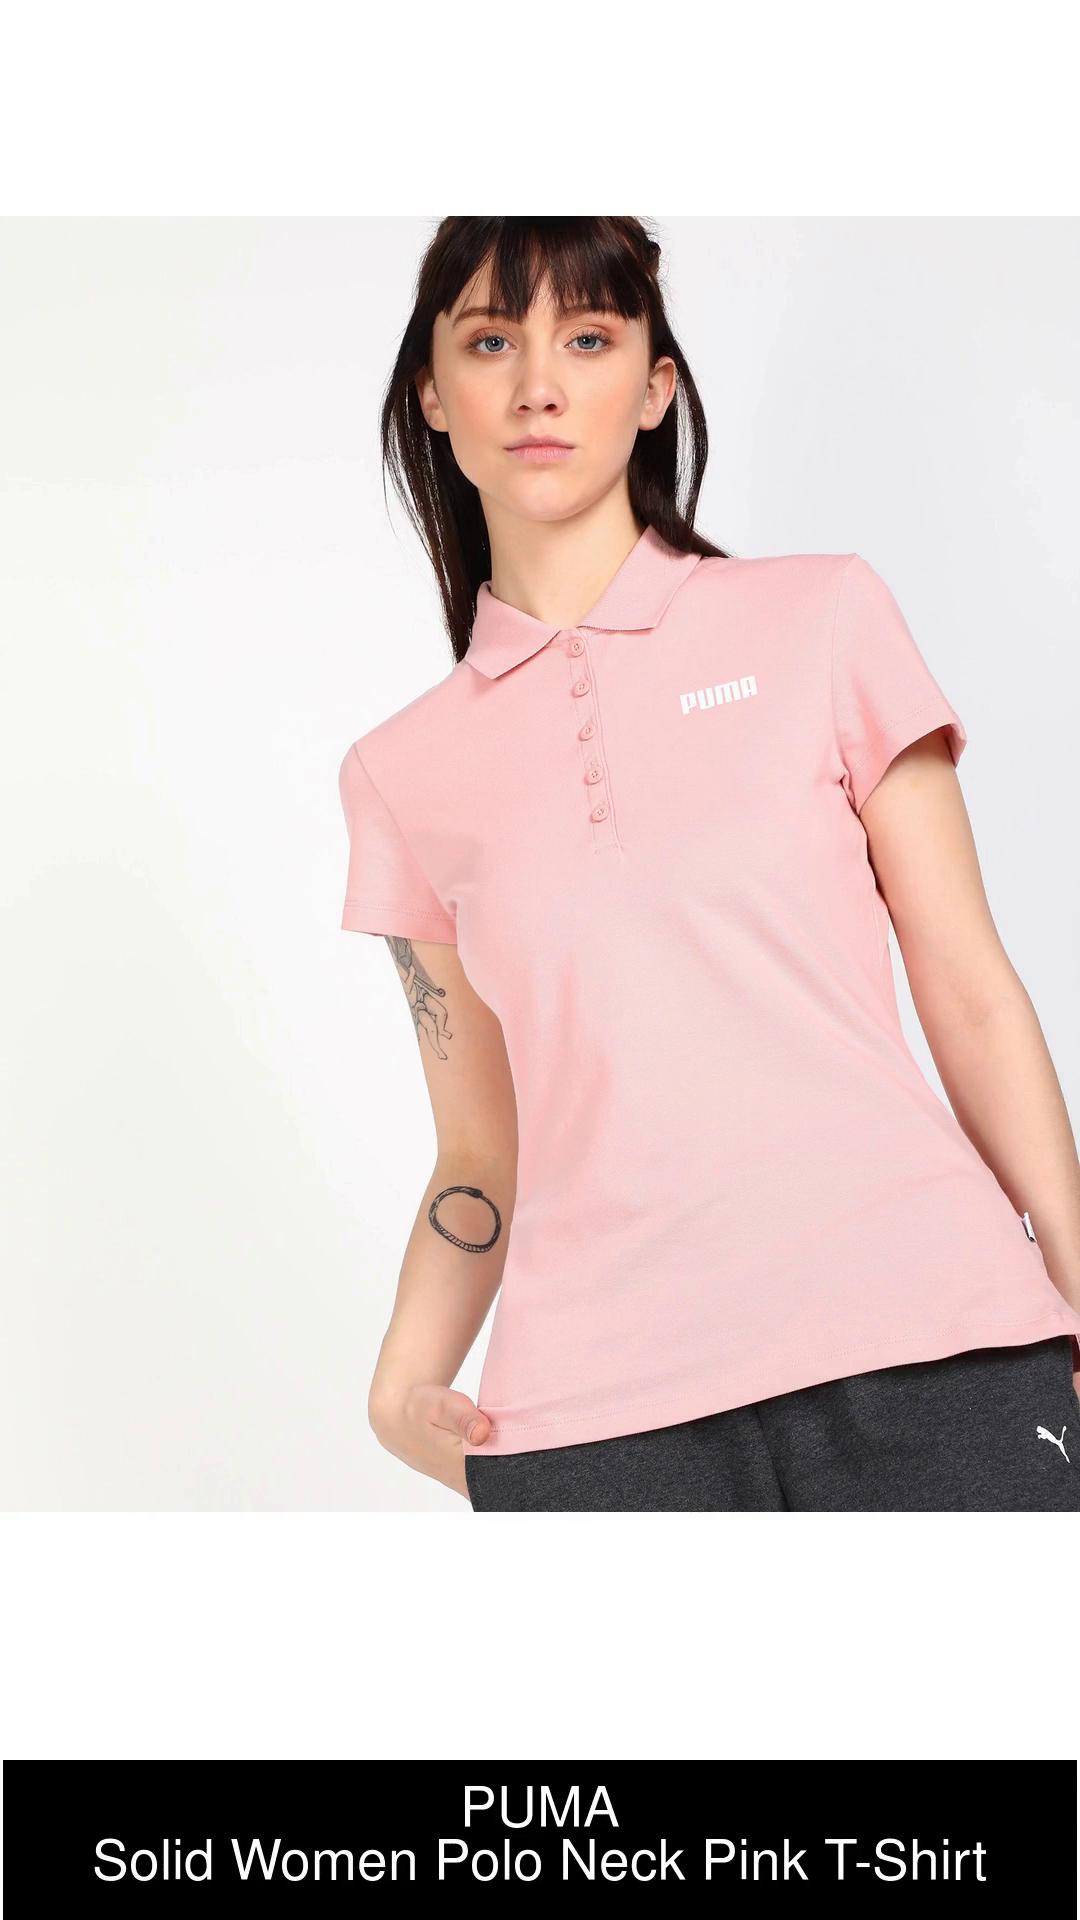 PUMA Solid Women Polo Neck Pink T-Shirt - Buy PUMA Solid Women Polo Neck Pink  T-Shirt Online at Best Prices in India